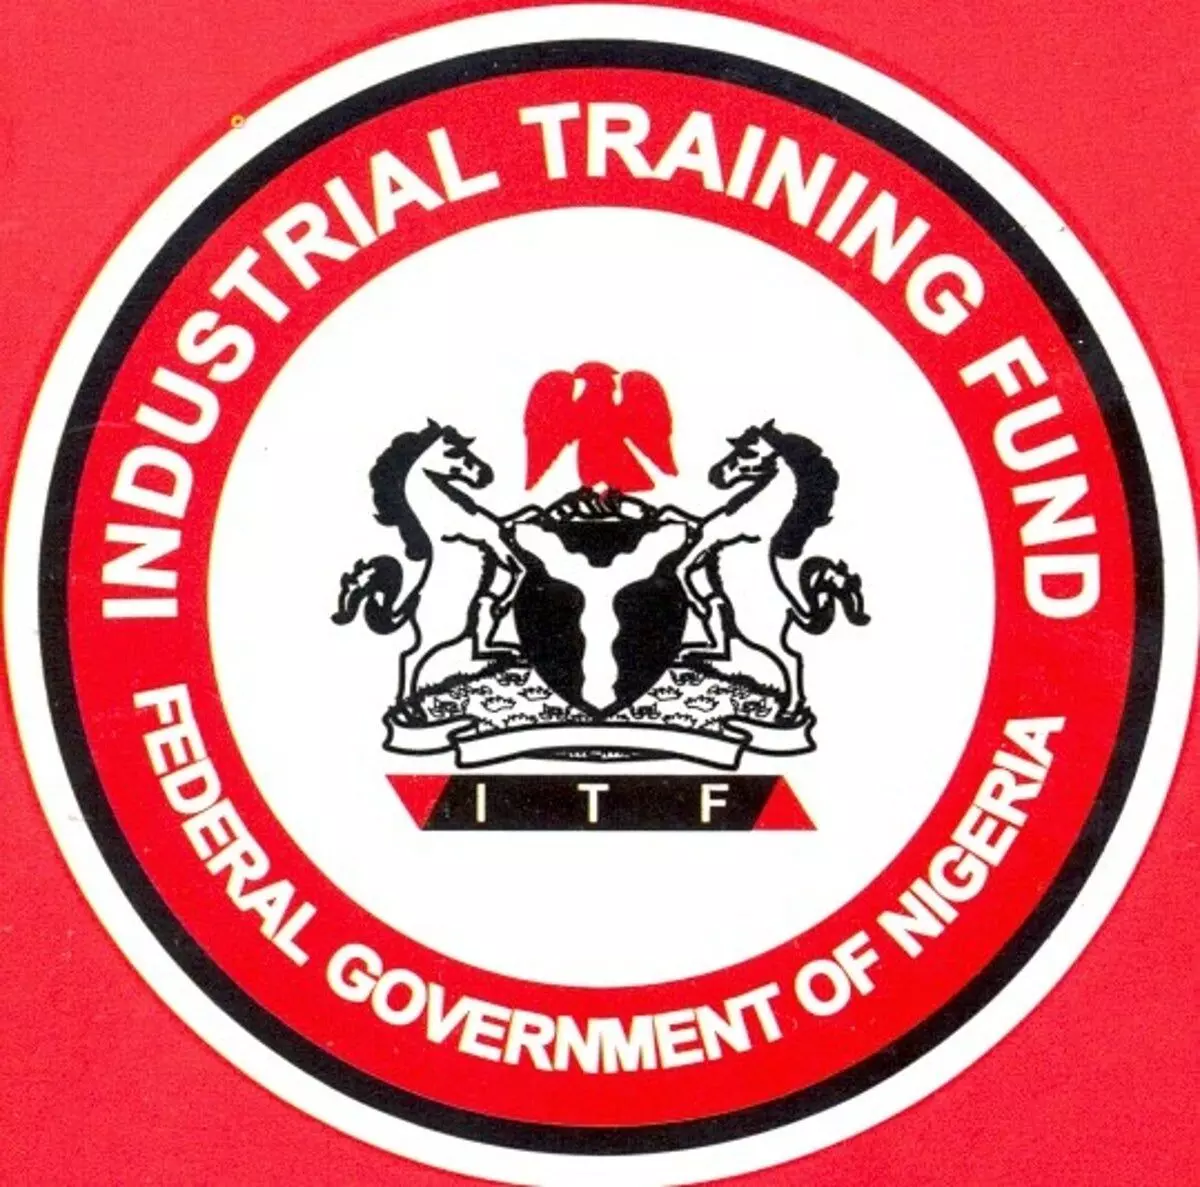 Skills acquisition: ITF seeks collaboration with states, LGAs, NGOs